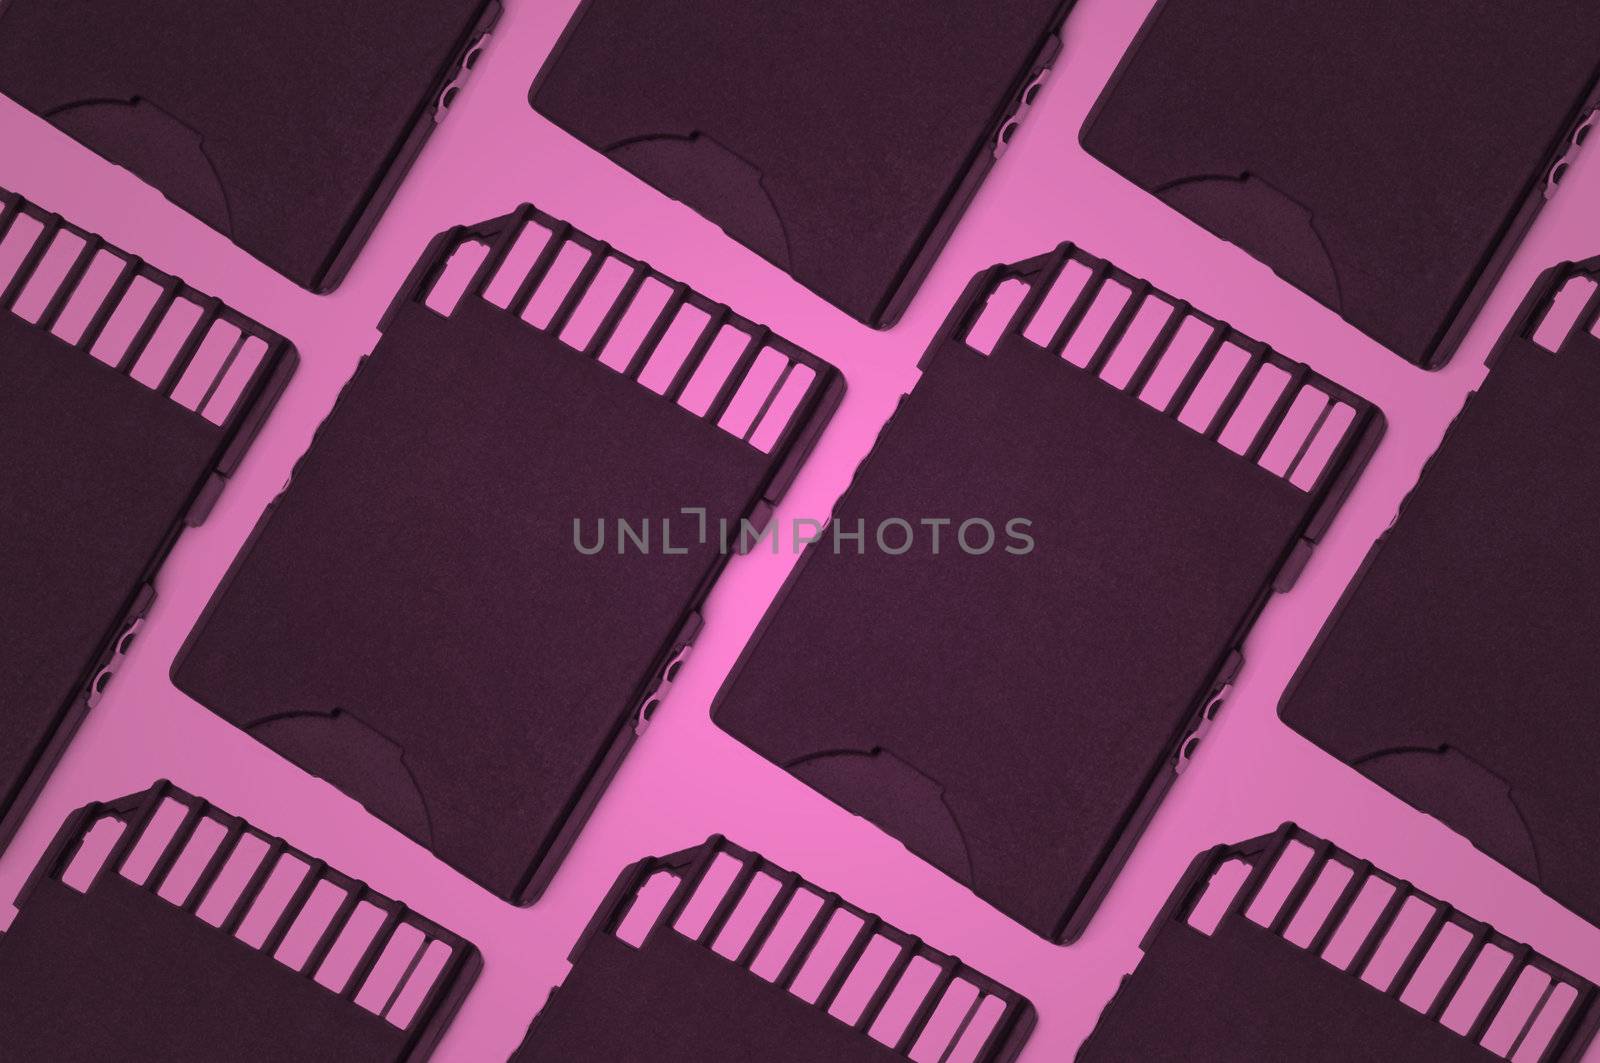 Close up on several sd cards arranged in a parallel pattern with pink filter